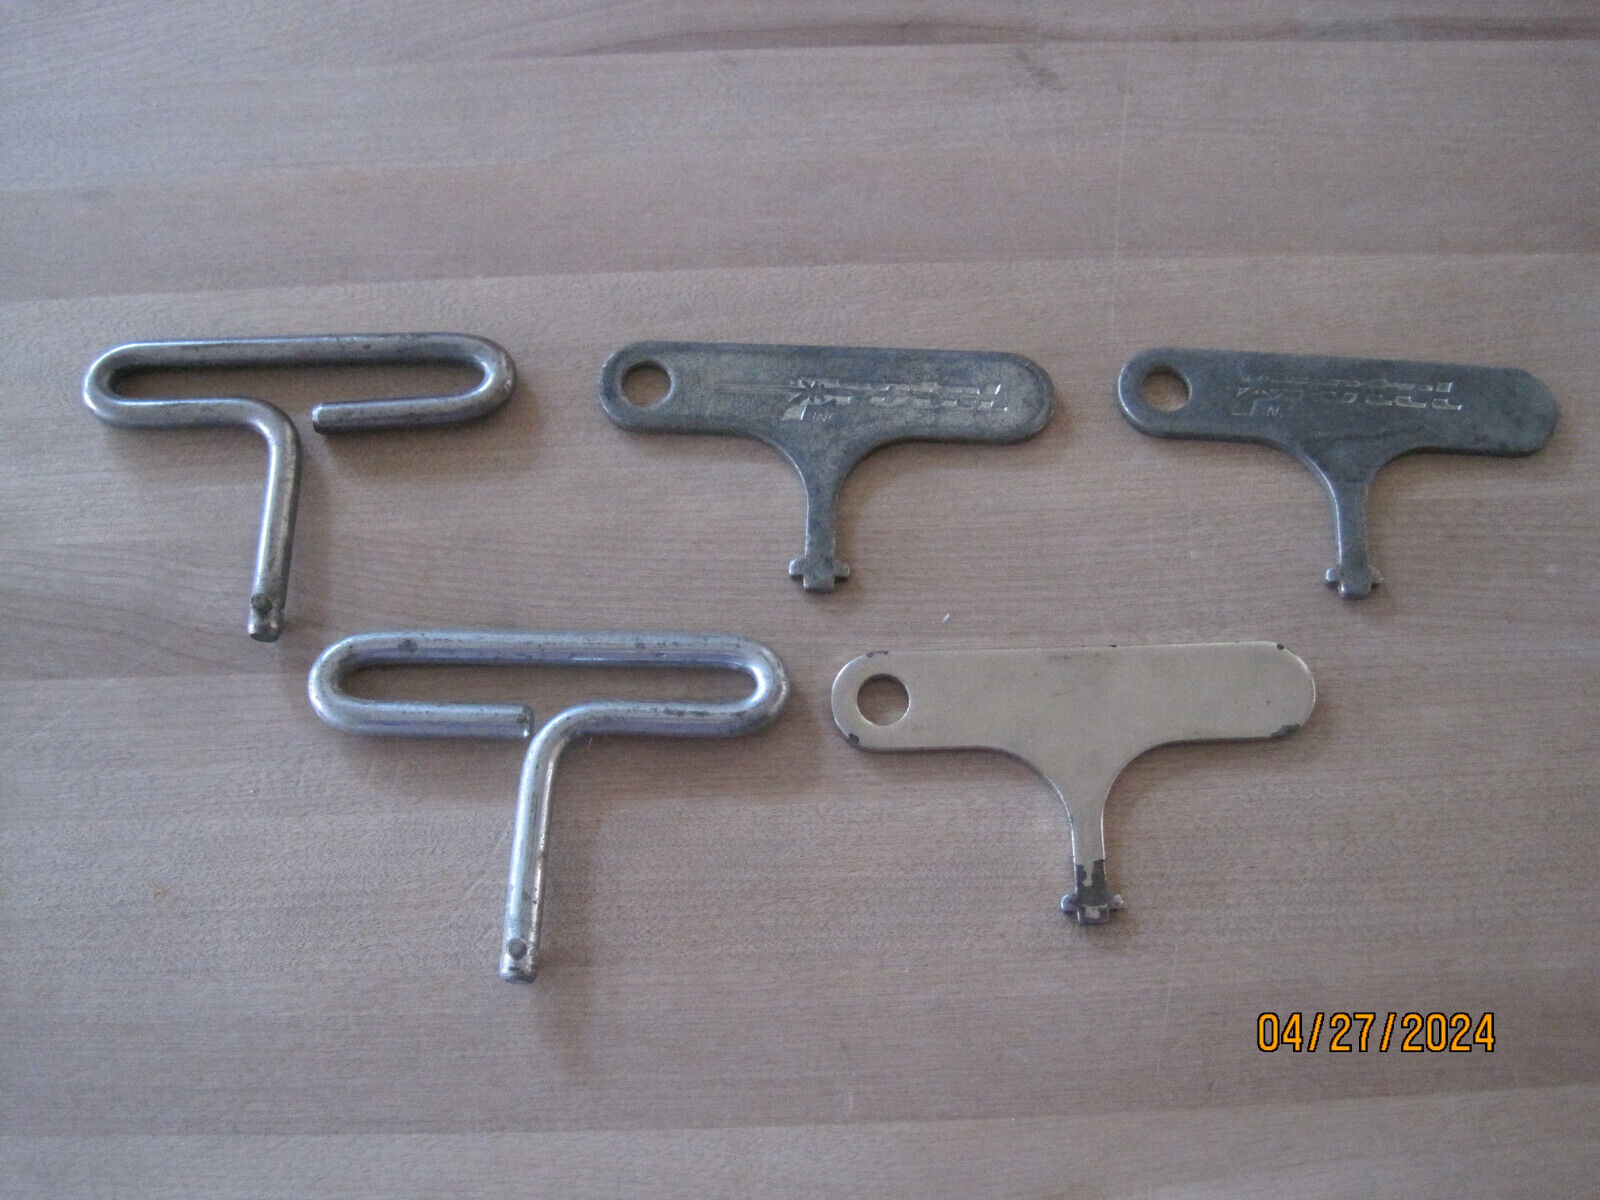 LOT OF 5--STEEL PAYPHONE T KEY T-KEY PAY PHONE WRENCH ACCESS TOOLS--2 ARE PROTEL